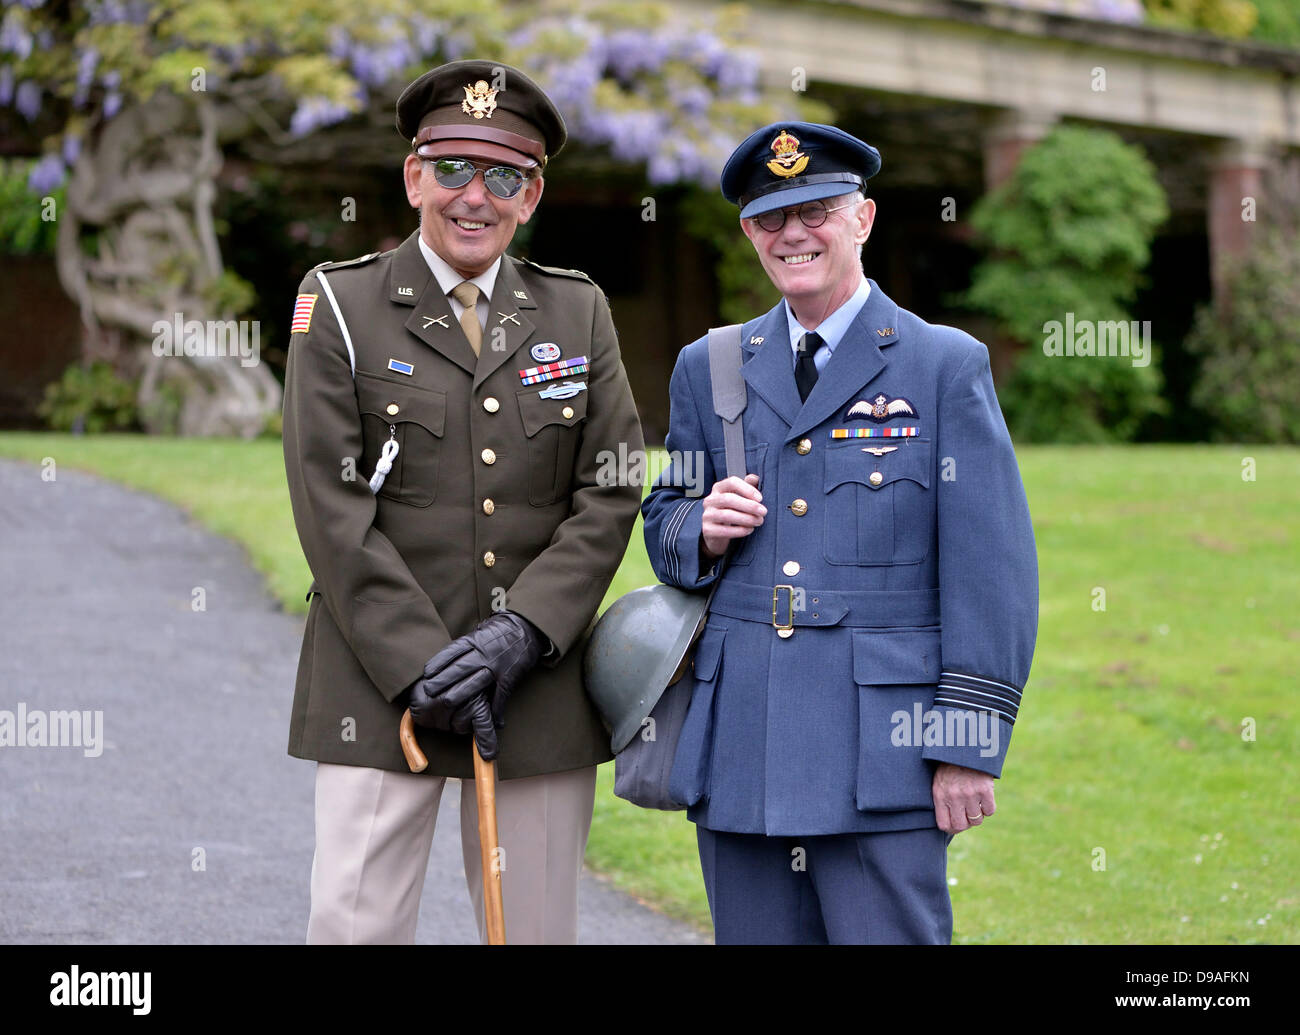 Harrogate, Yorkshire, UK. 16th June, 2013.   A man in a USA major's uniform and another dressed as a  a RAF Flight Lieutenant pose at an event in Valley Gardens to raise money for The Magnesia Well Pump Room Project to create an exhibition on mineral springs. Credit:  John Fryer/Alamy Live News Stock Photo